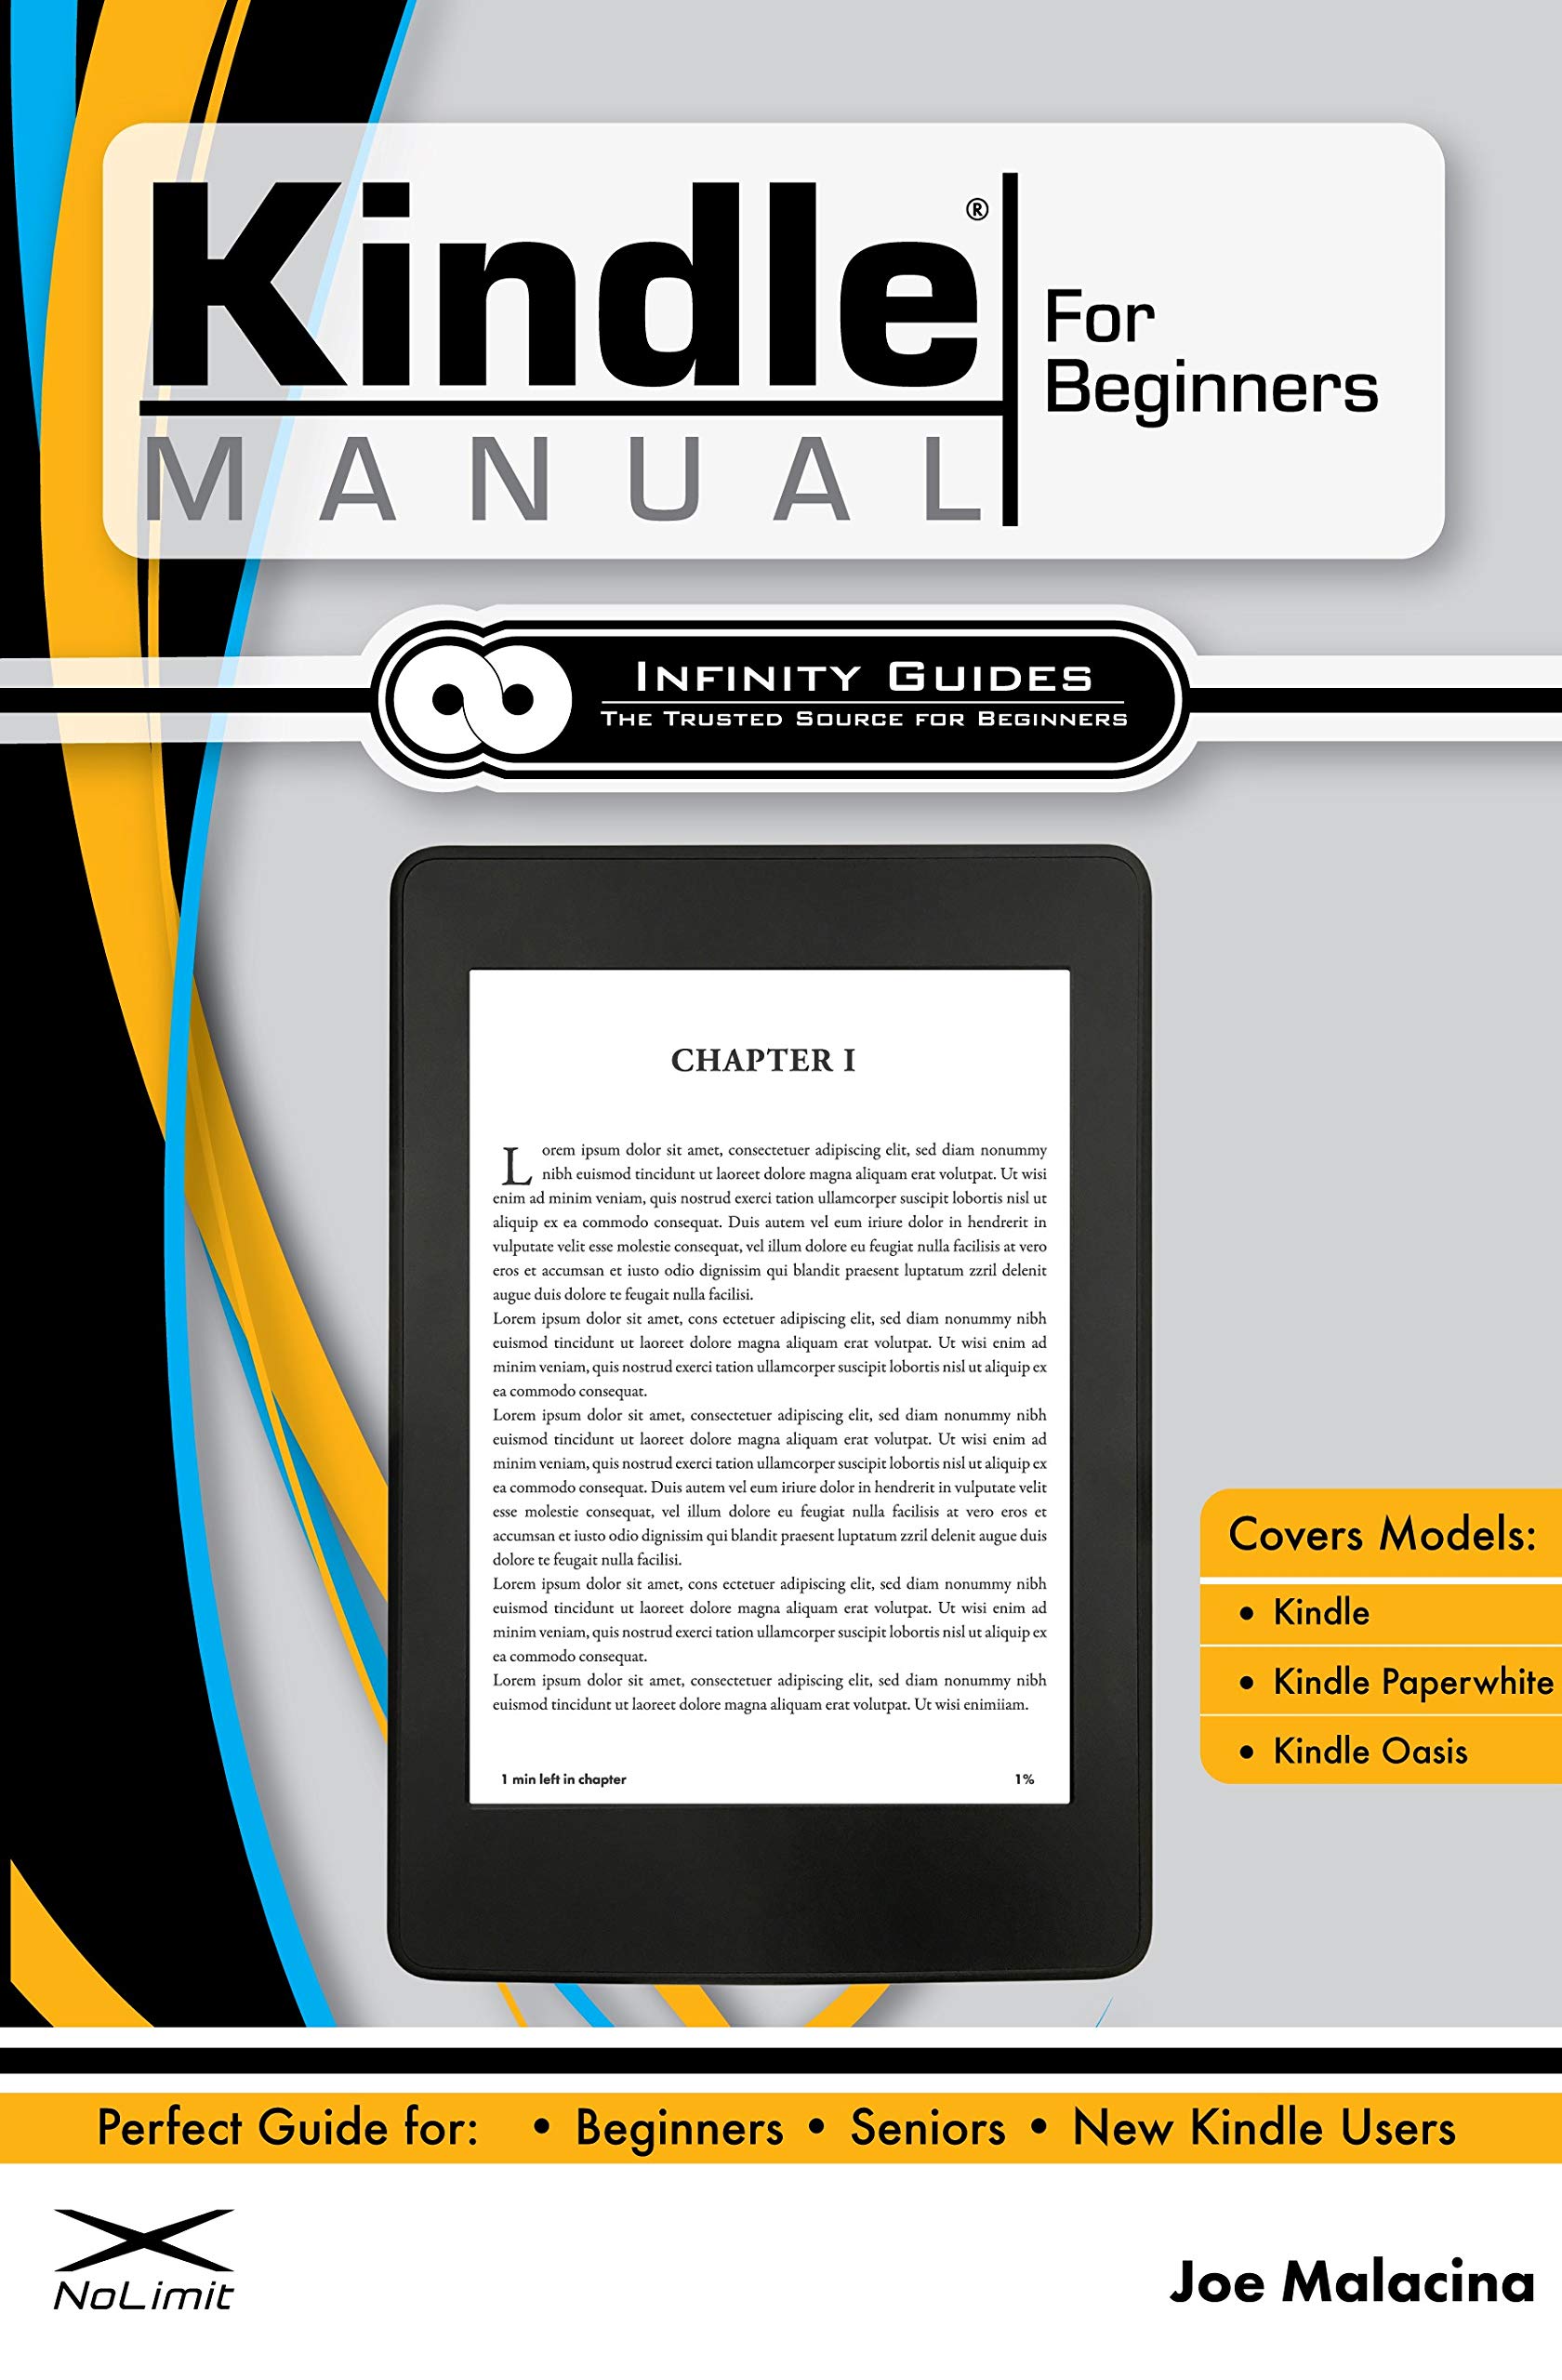 Kindle Manual for Beginners: The Perfect Kindle Guide for Beginners, Seniors, & New Kindle Users